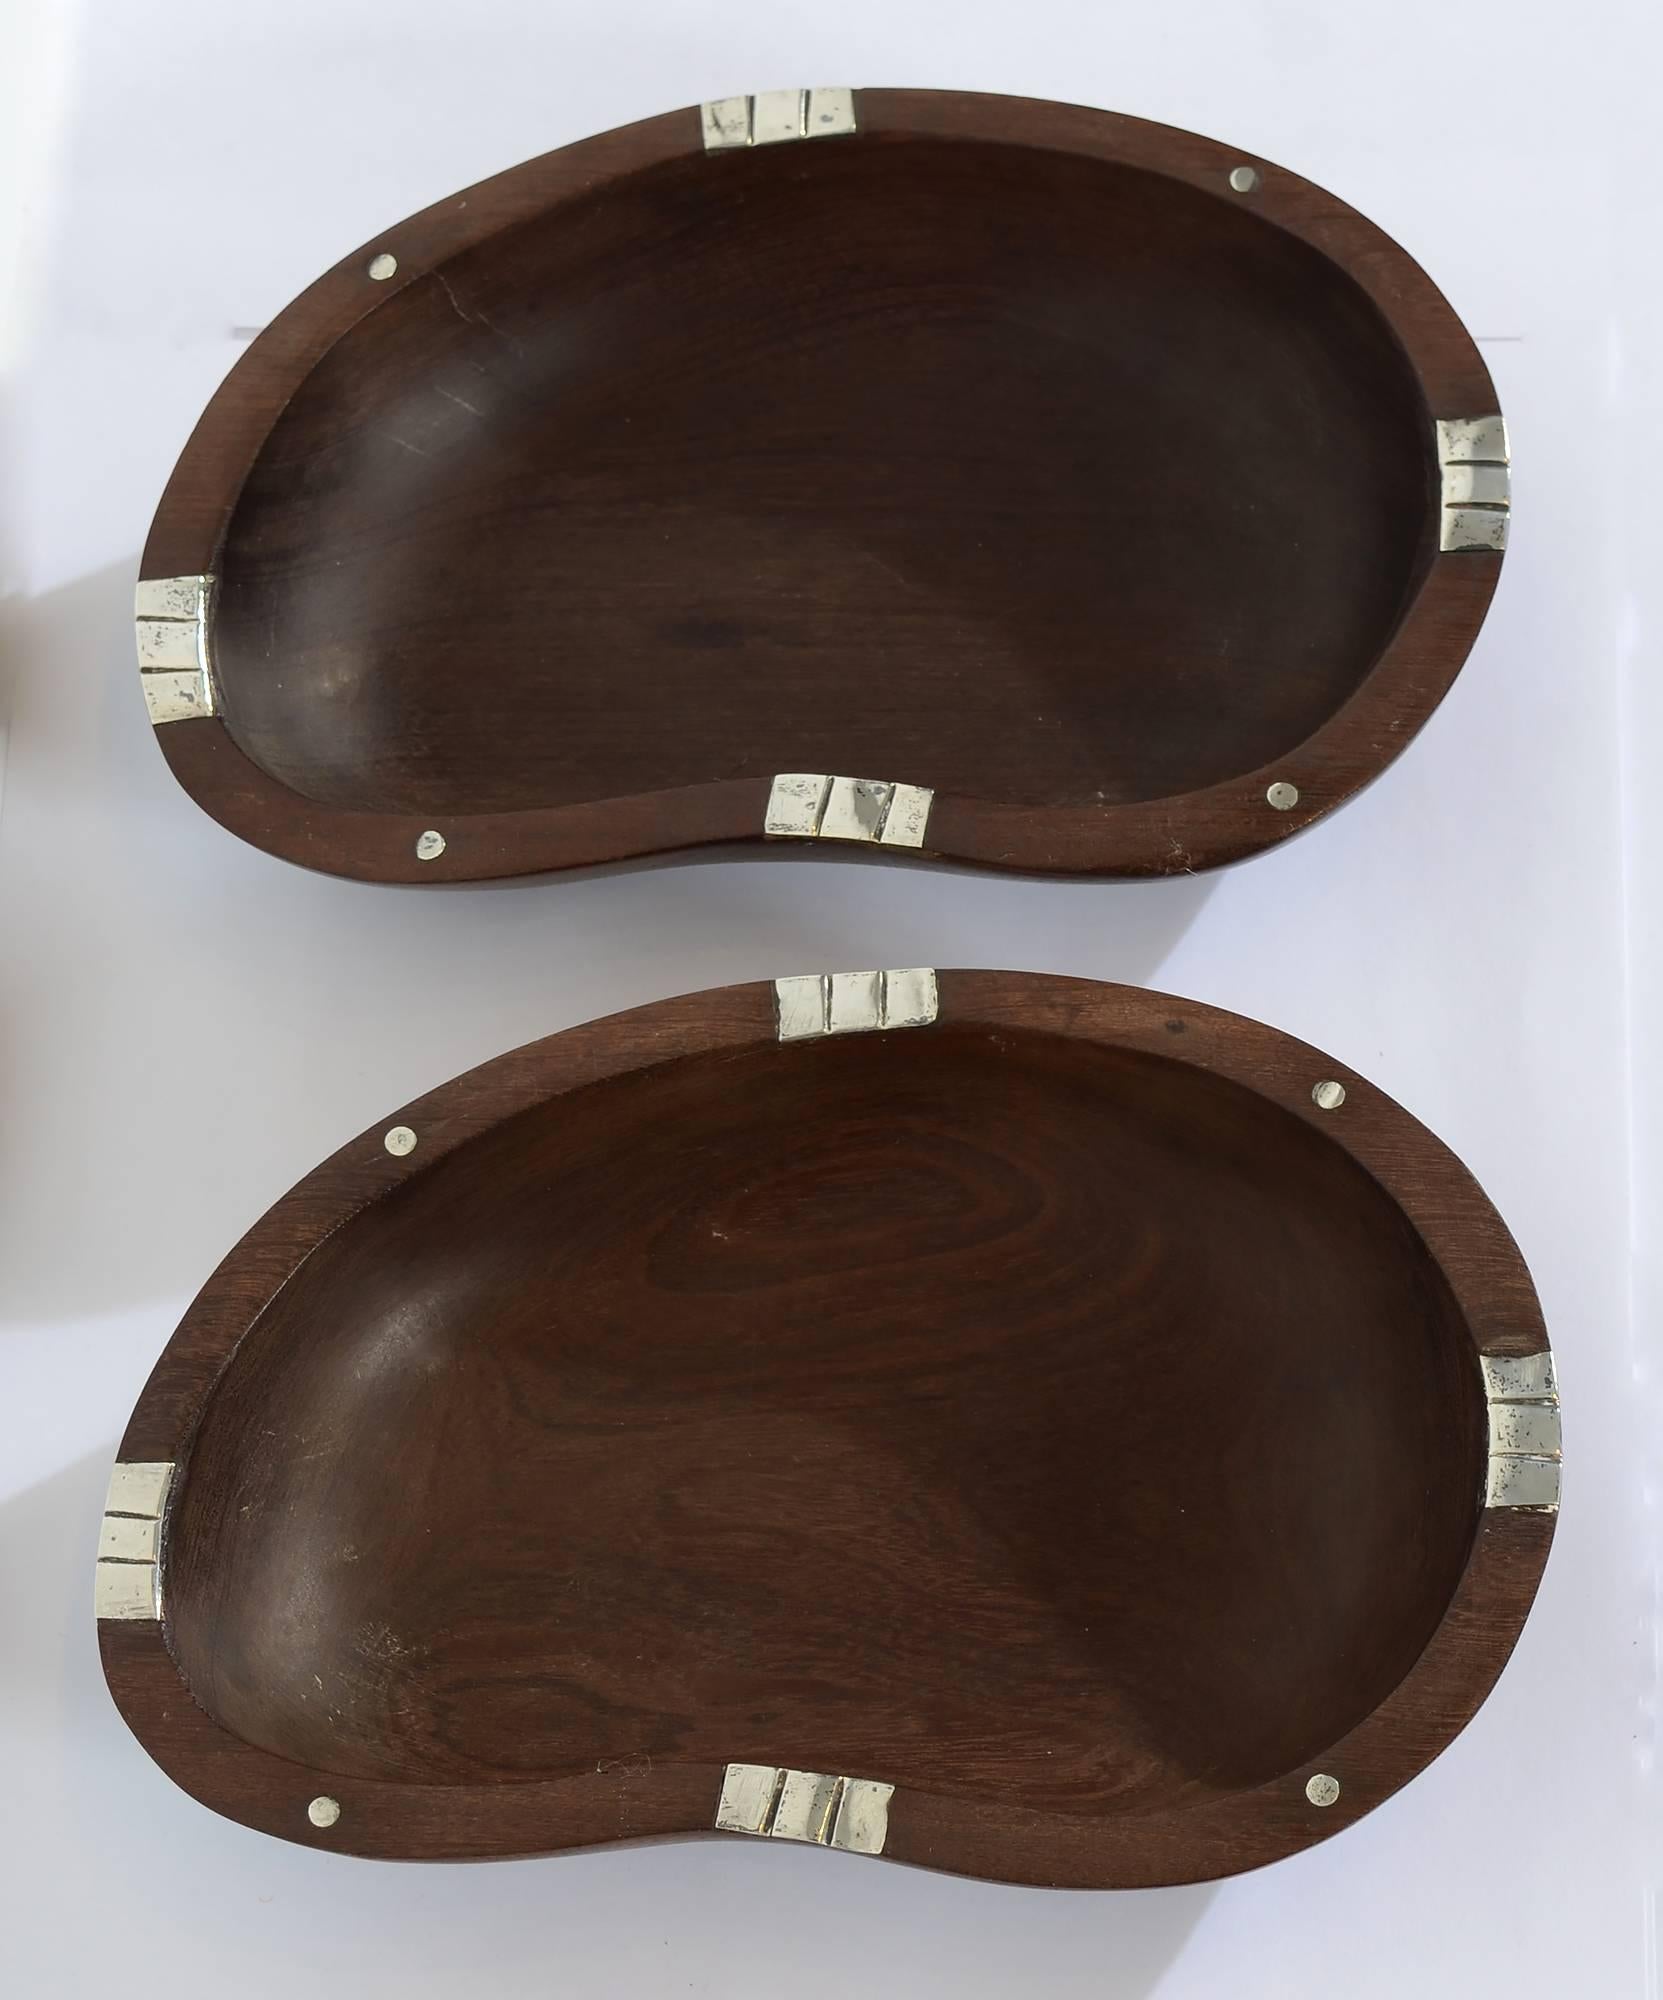 This is an unusual pair of wood bowls by silver master, William Spratling. The wood bowls have silver ornamentation of squares and circles. The lima bean shaped bowls measure 7